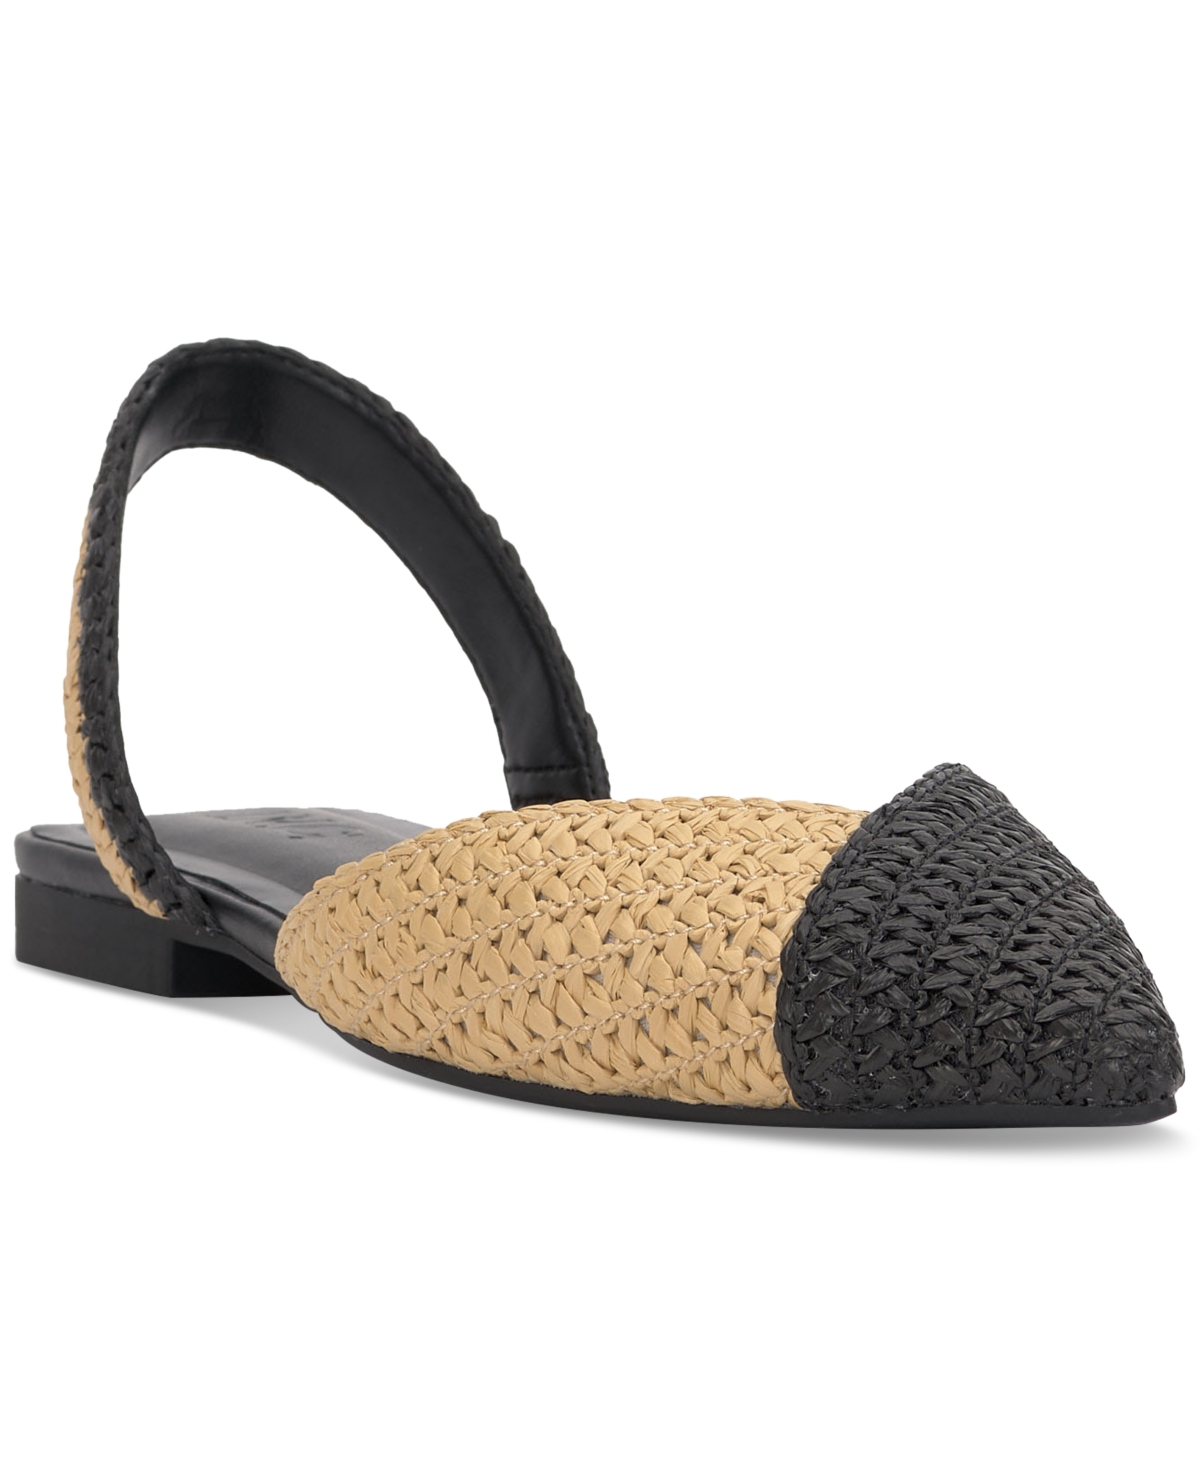 Women's Margey Slingback Flats, Created for Macy's - Black/Natural Raffia